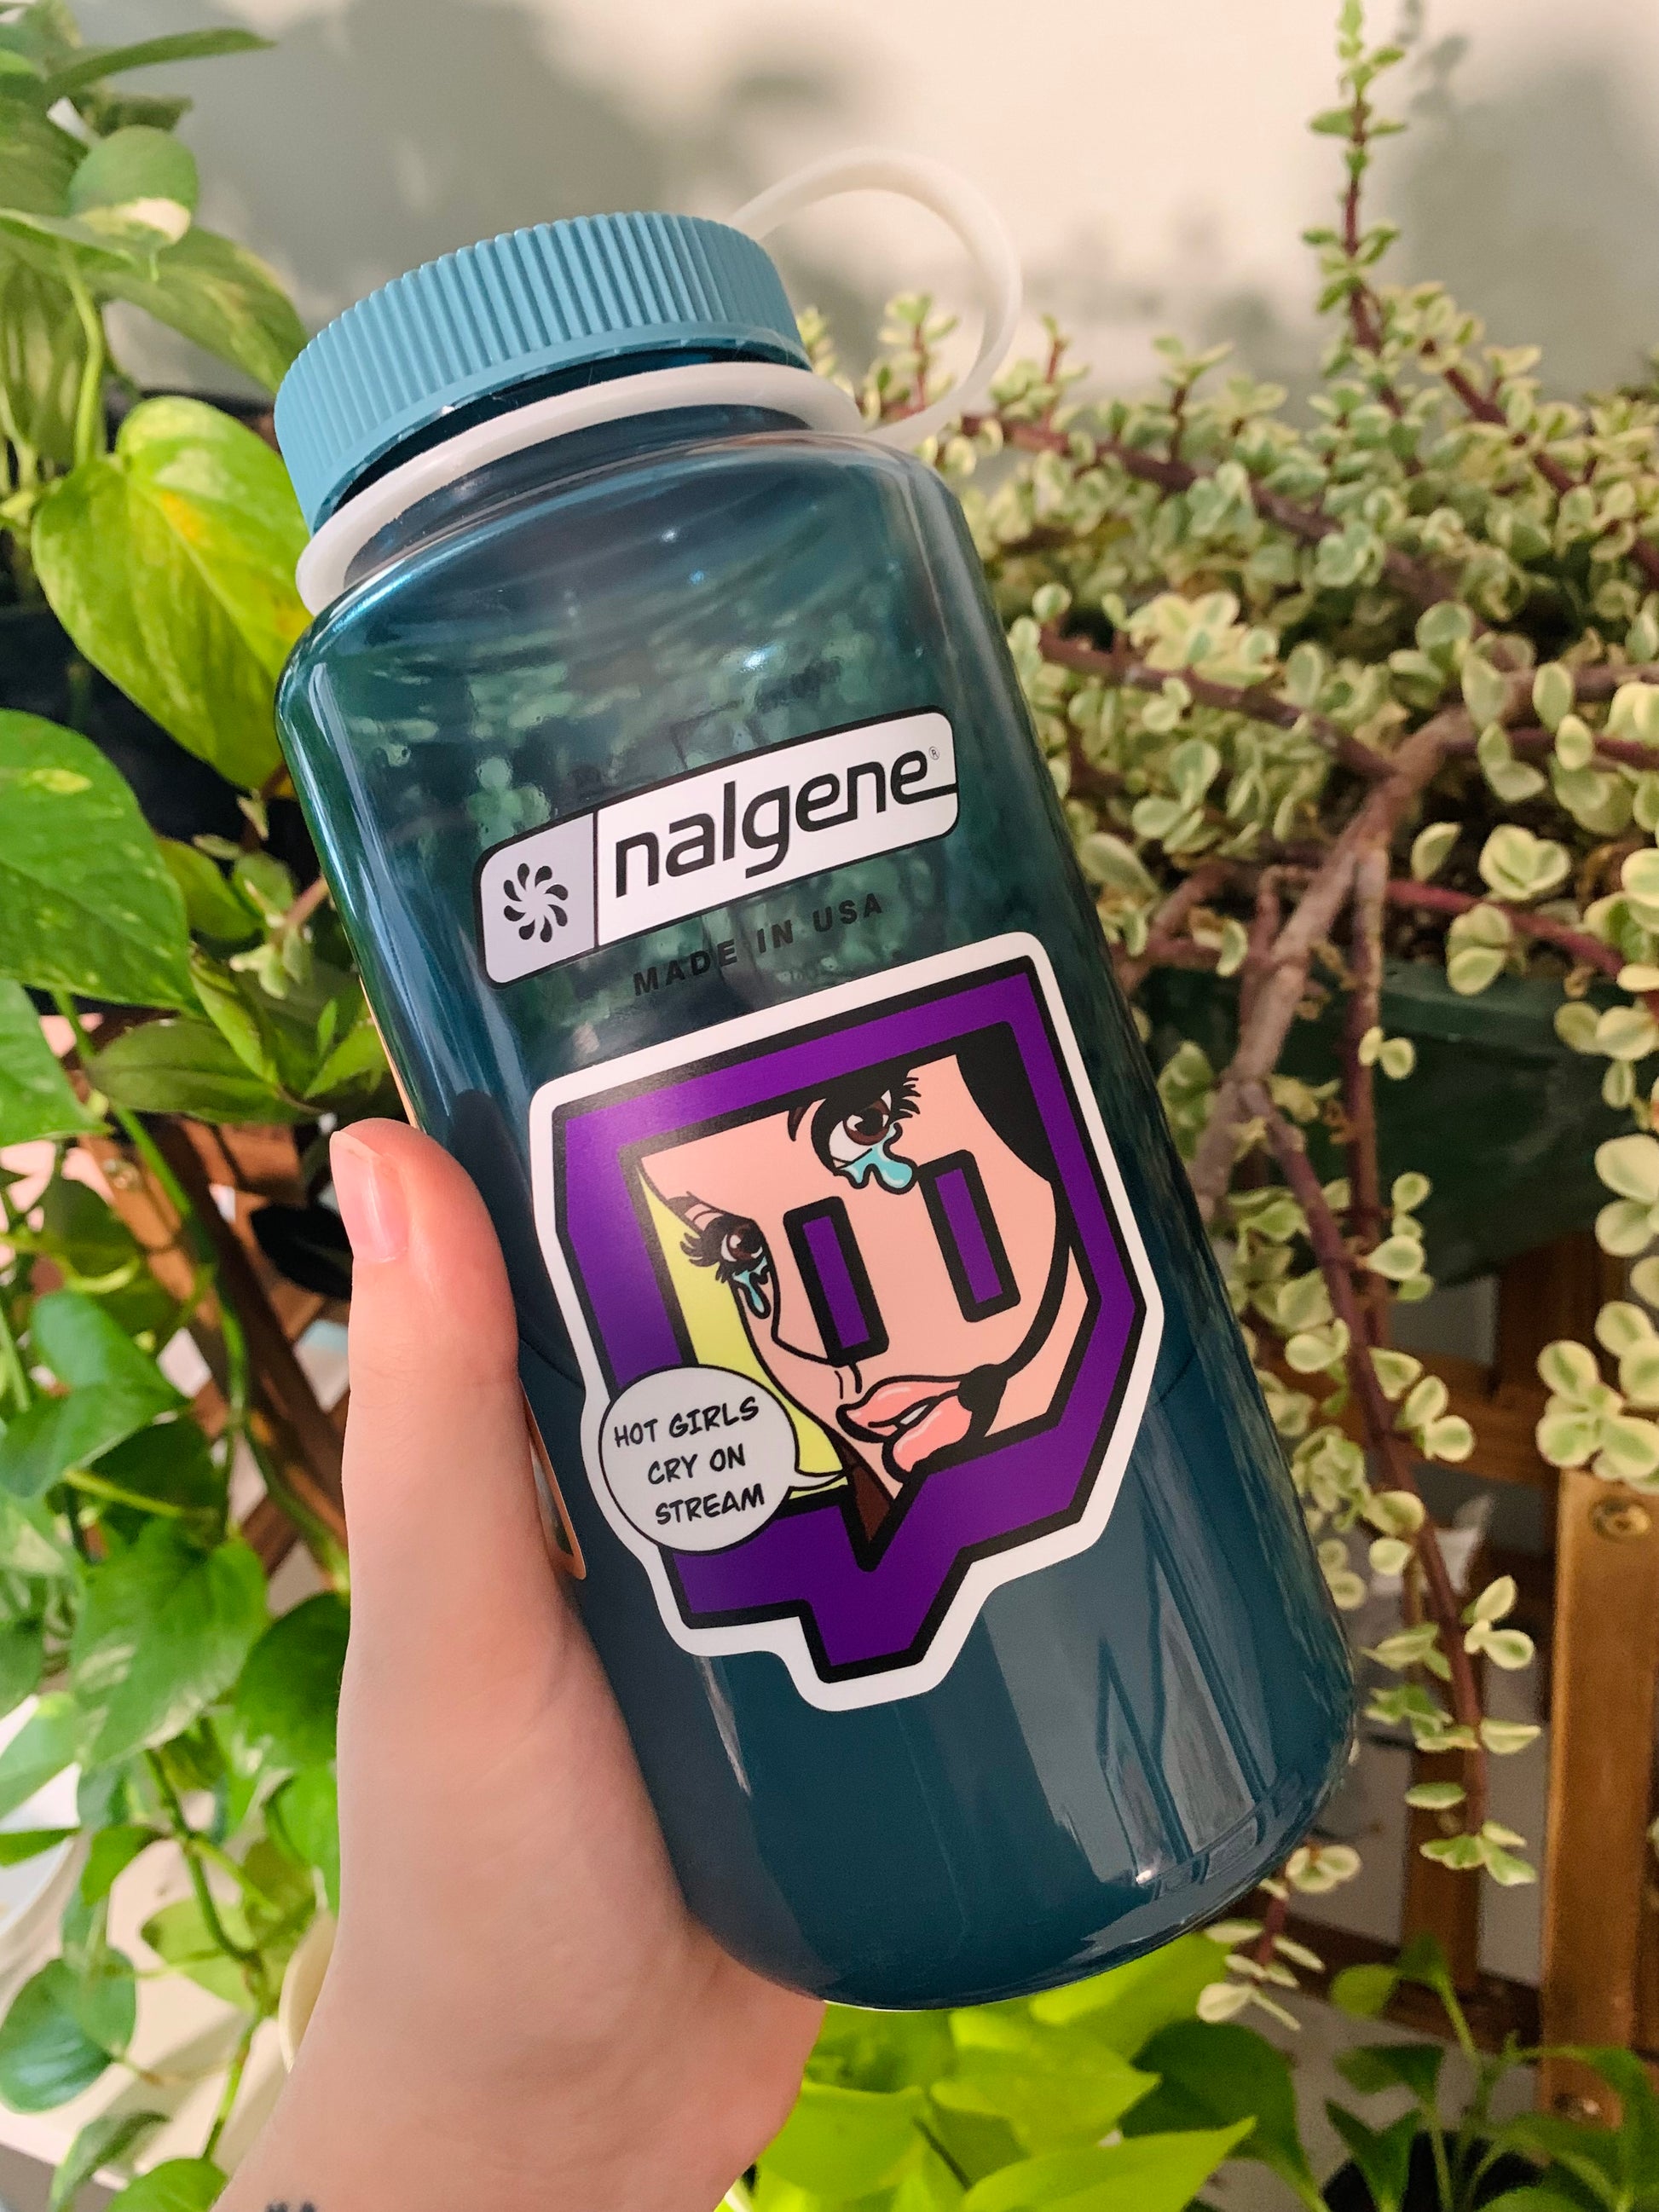 The hot girls cry on stream sticker, featured on a blue nalgene water bottle in front of some houseplants.